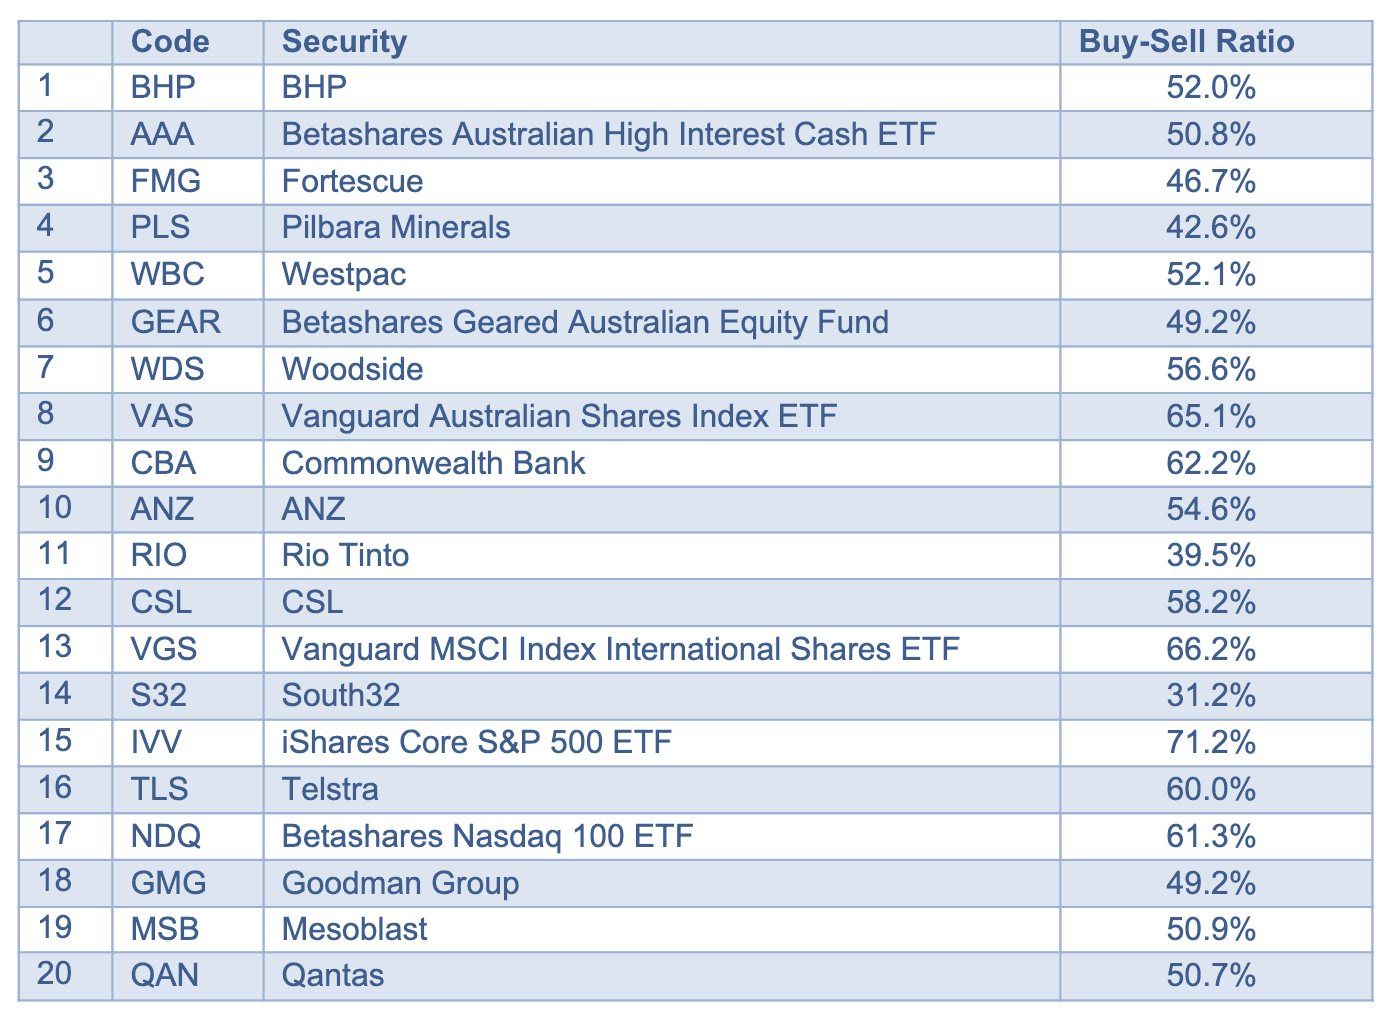 Top 20 securities traded by value 